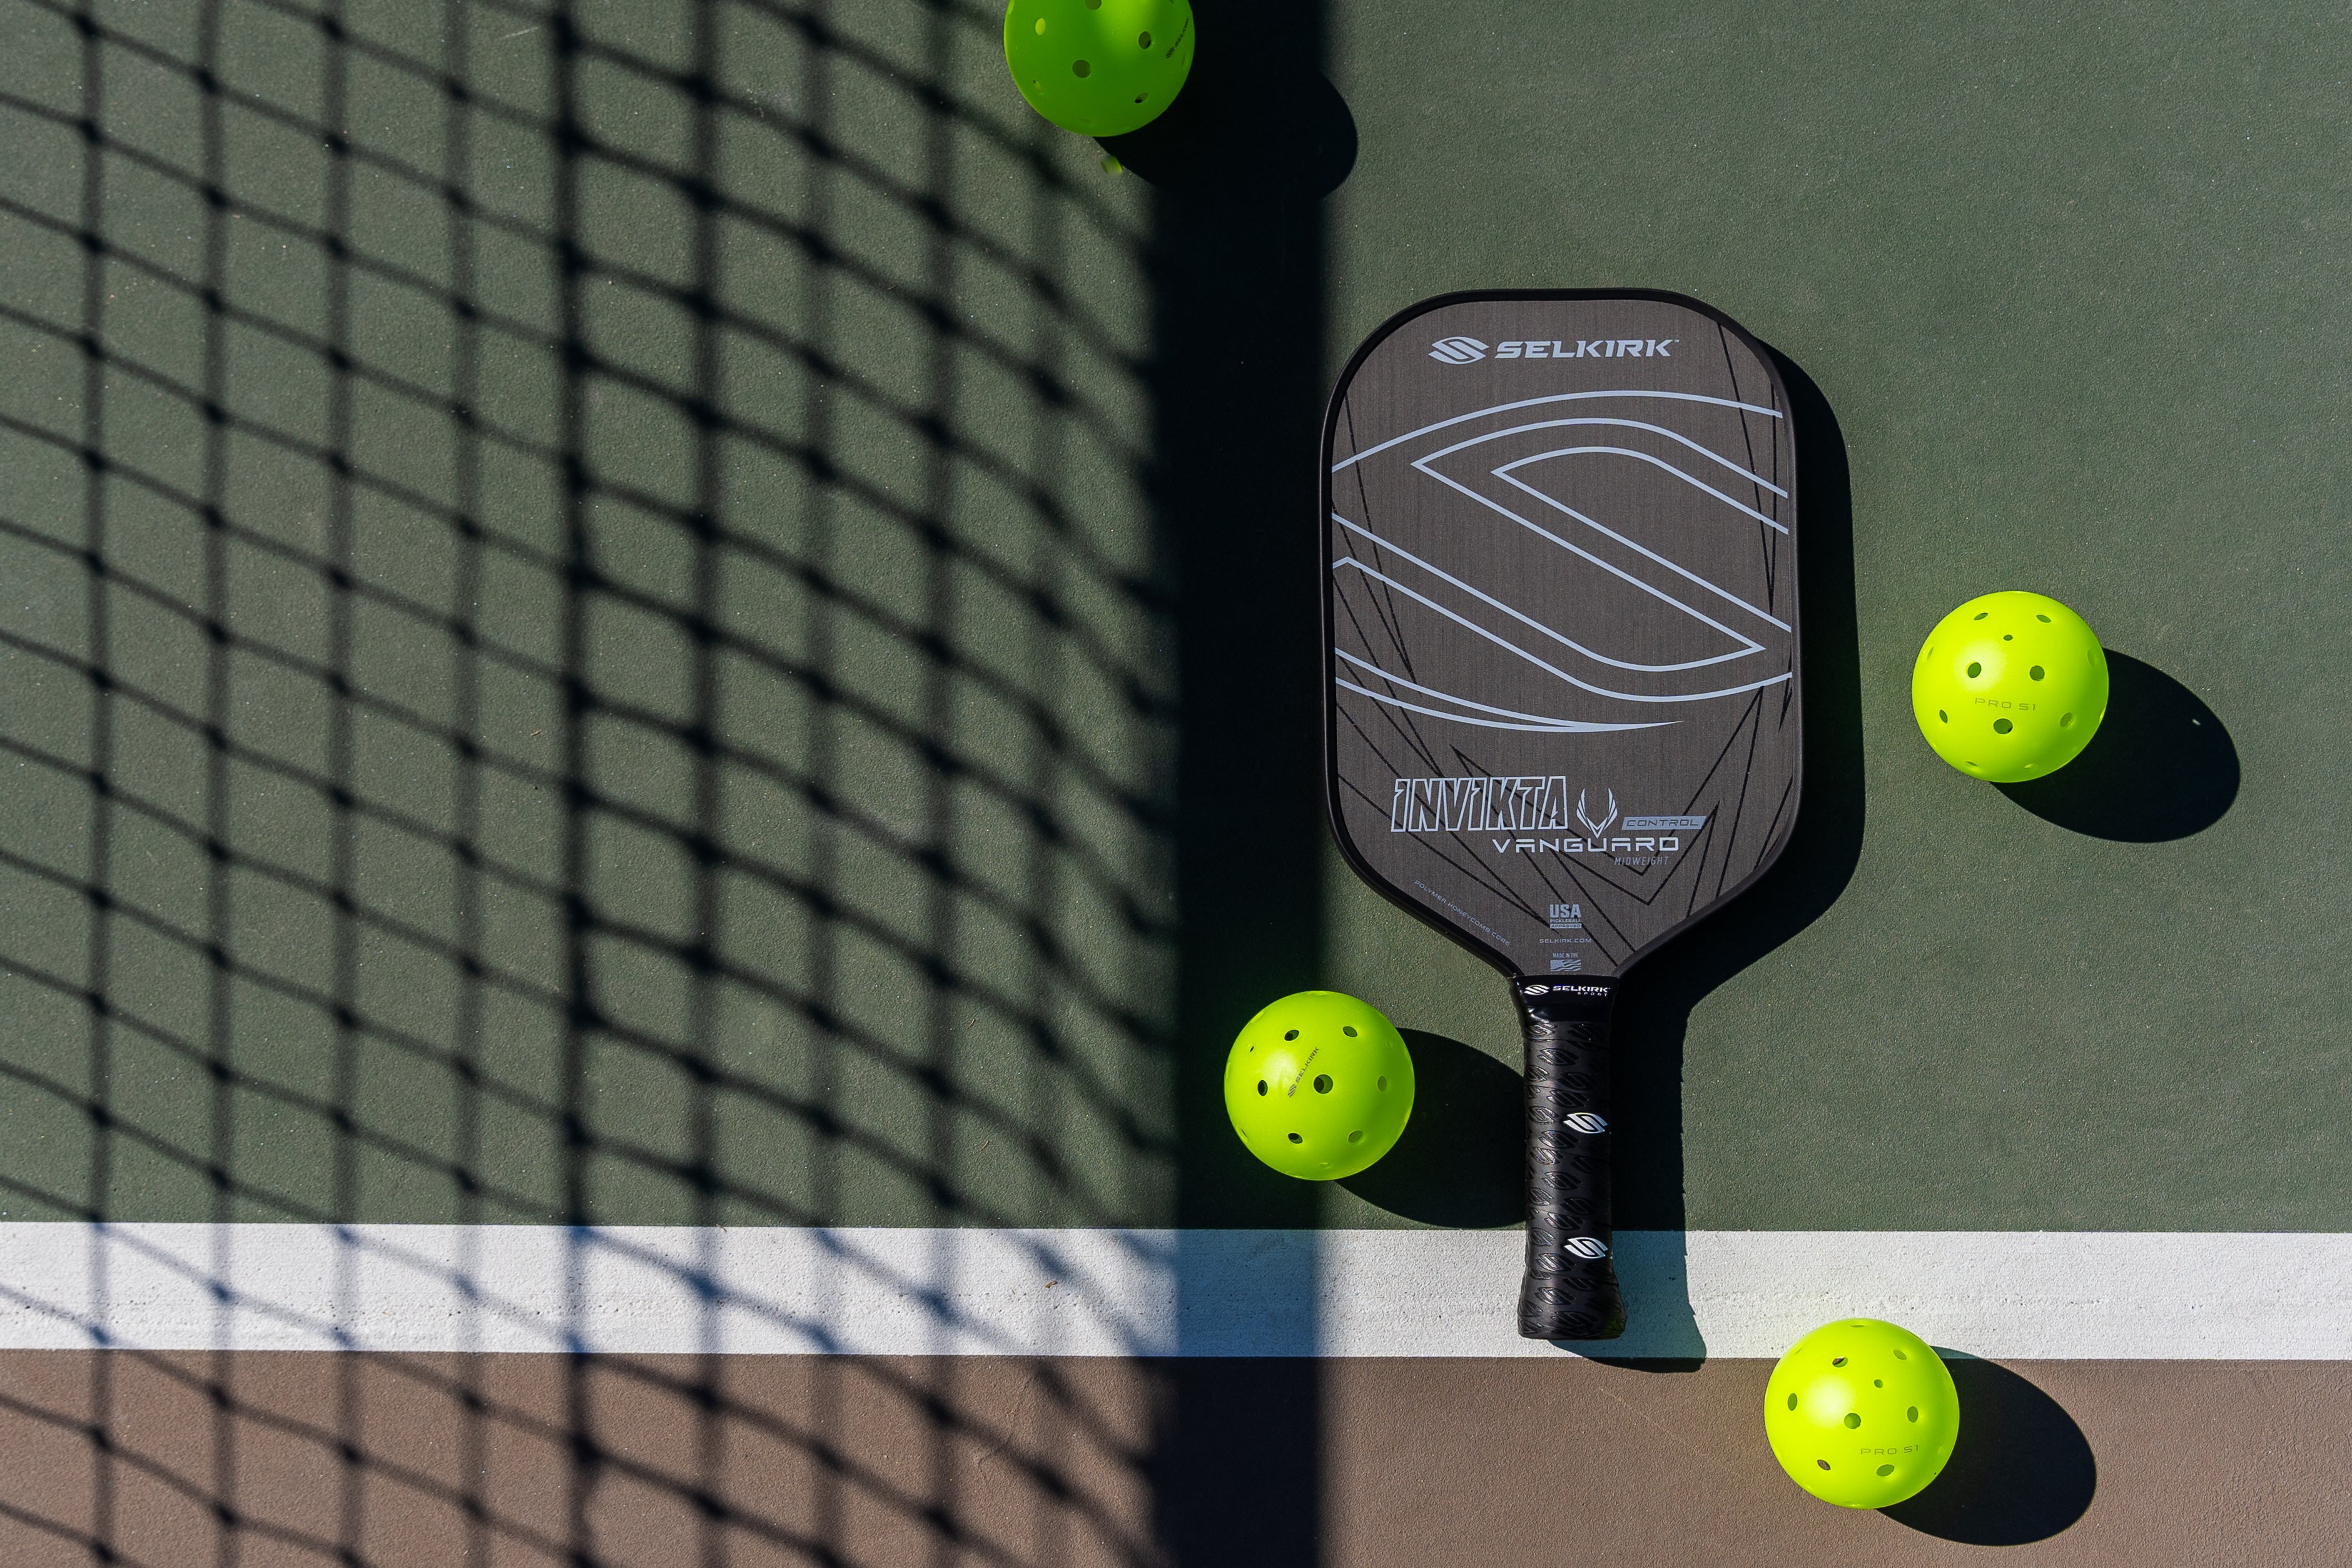 The Vanguard Control is a versatile paddle for players of all skill levels.